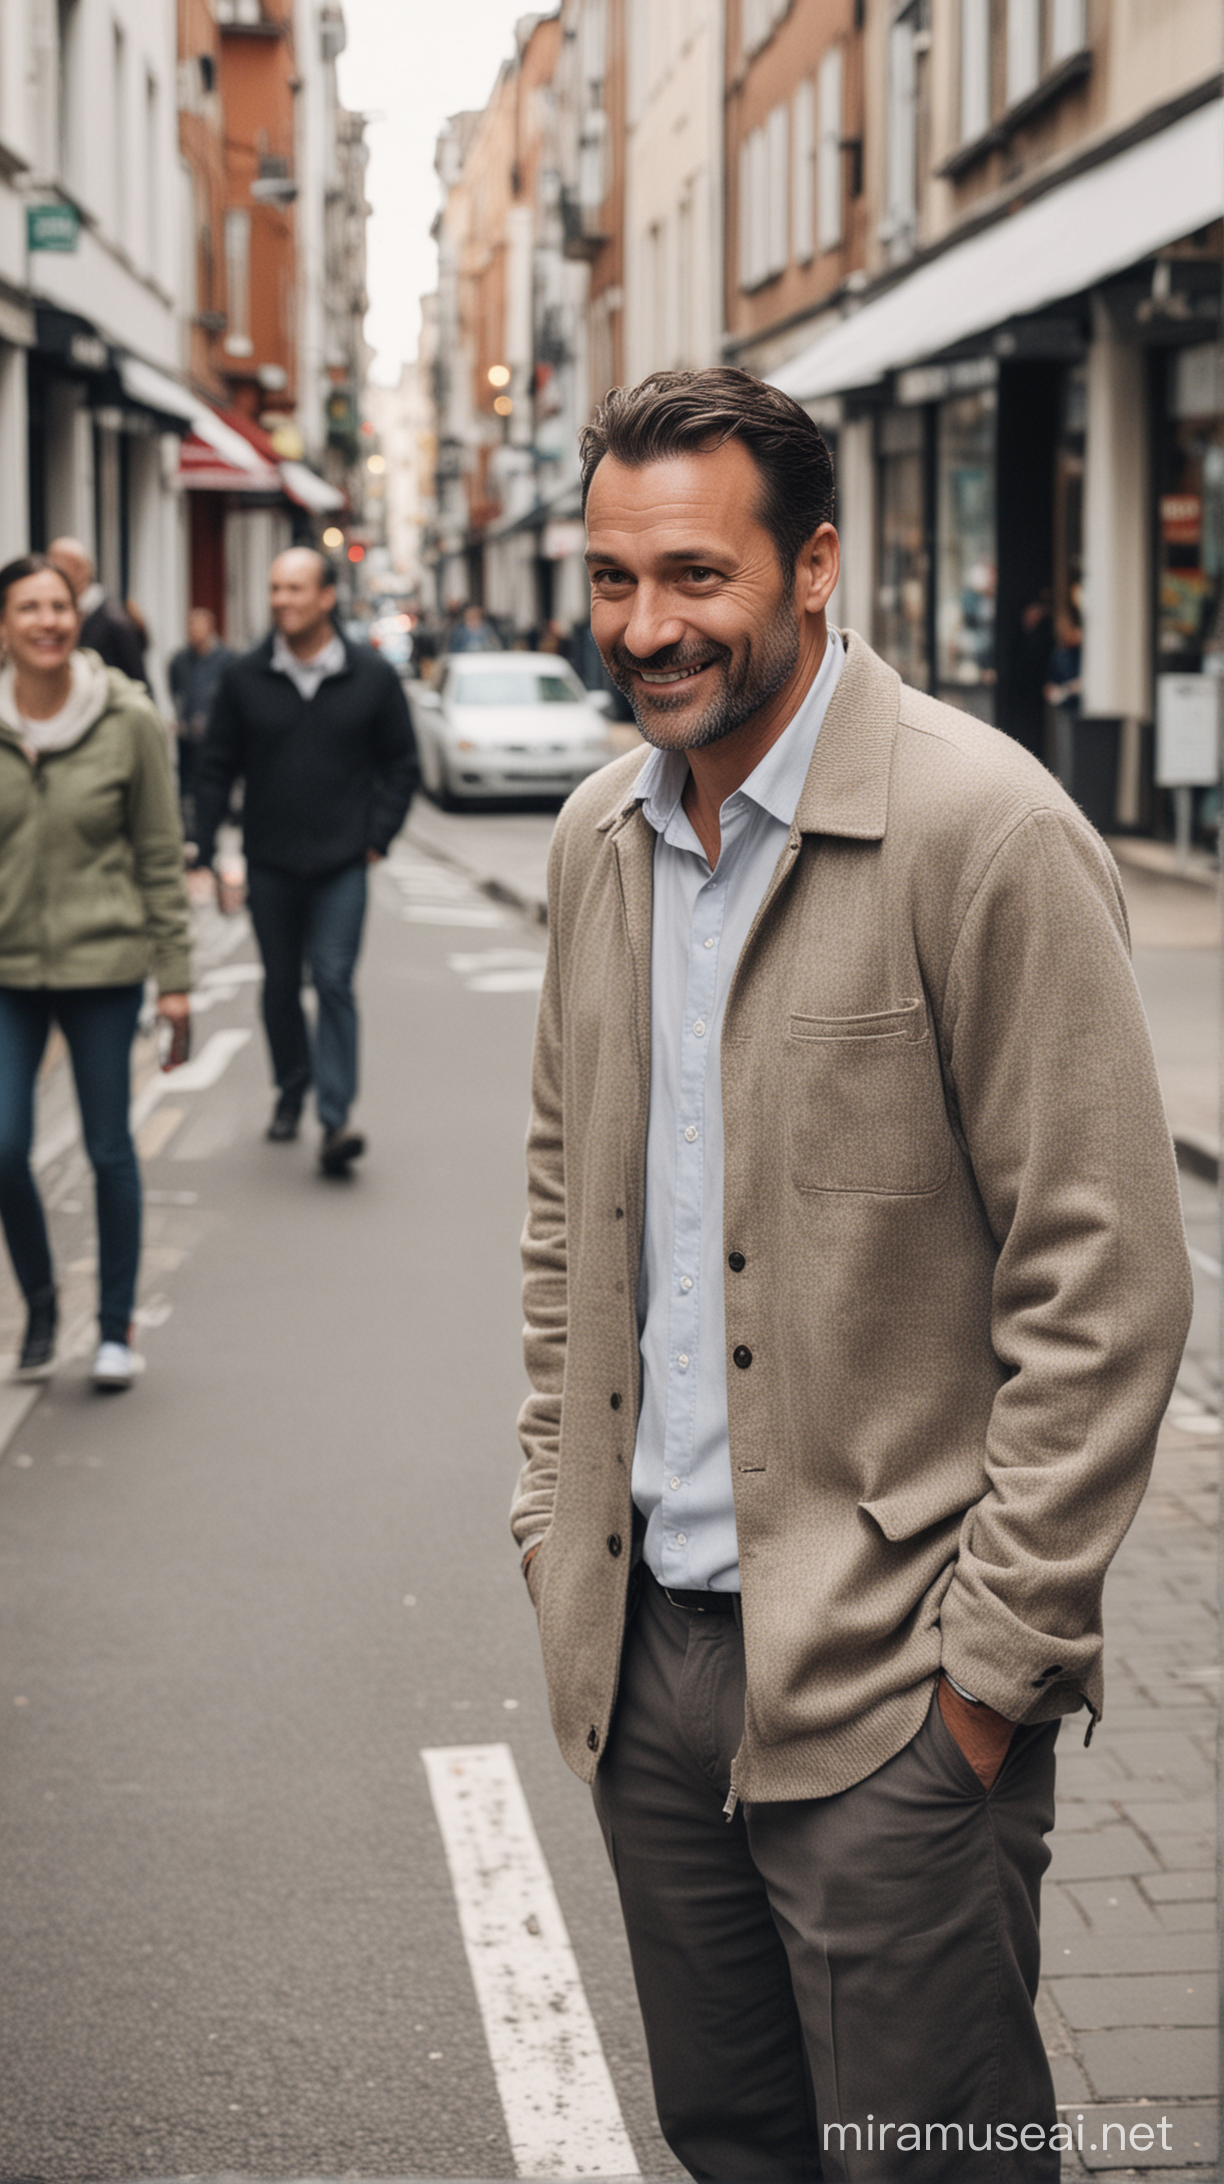 Image of a man in his 40's in a busy street scene in mid level neighbourhood
He has a slight smile while looking at something on the ground